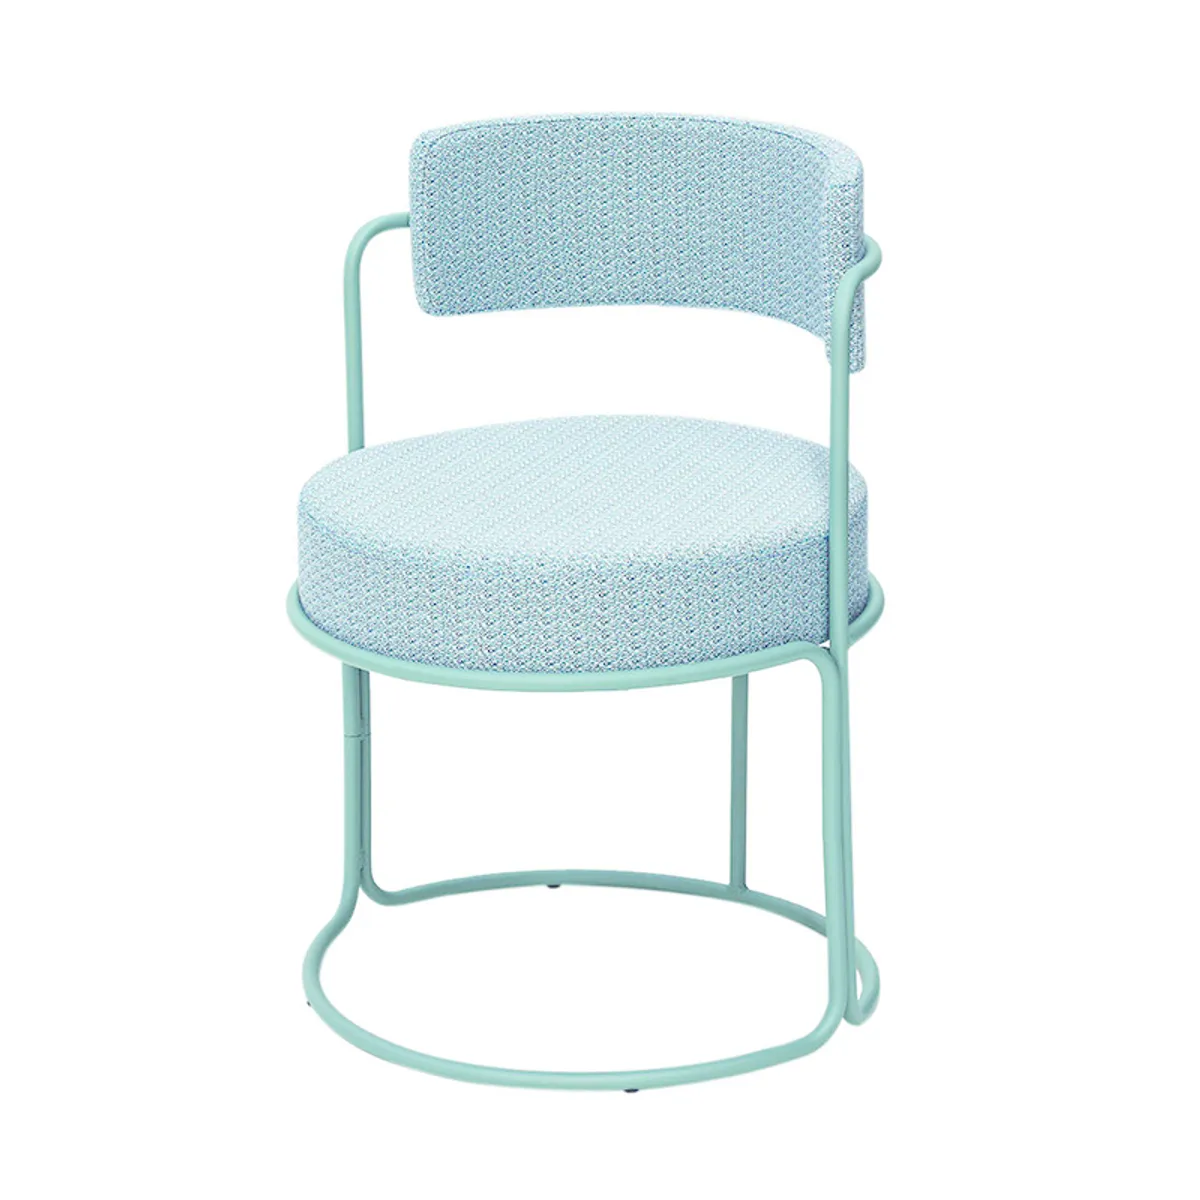 Miami Chair Outdoor Furniture Circular Metal Tube Frame With Blue Finish For Hotels Insideoutcontracts 019